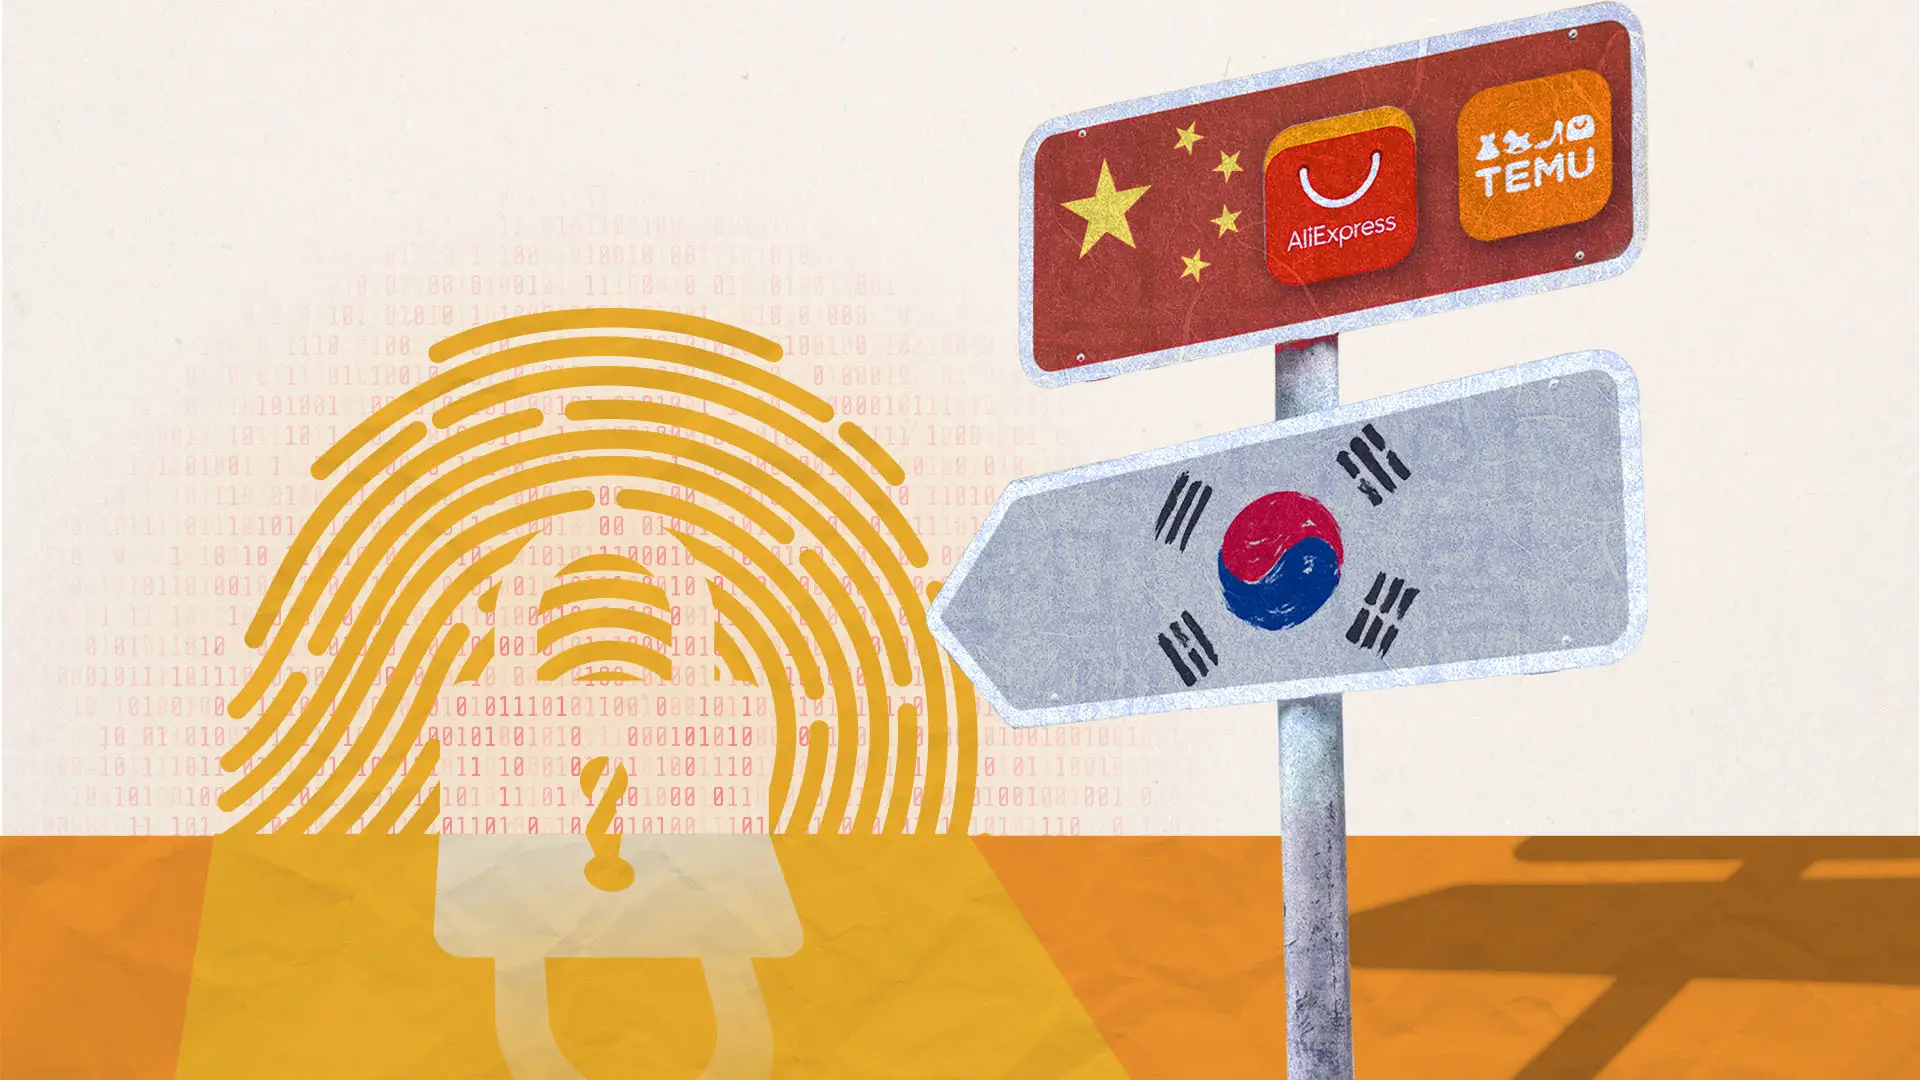 240419 China Privacy Protection SS - [Weekend Briefing] Undermining public trust